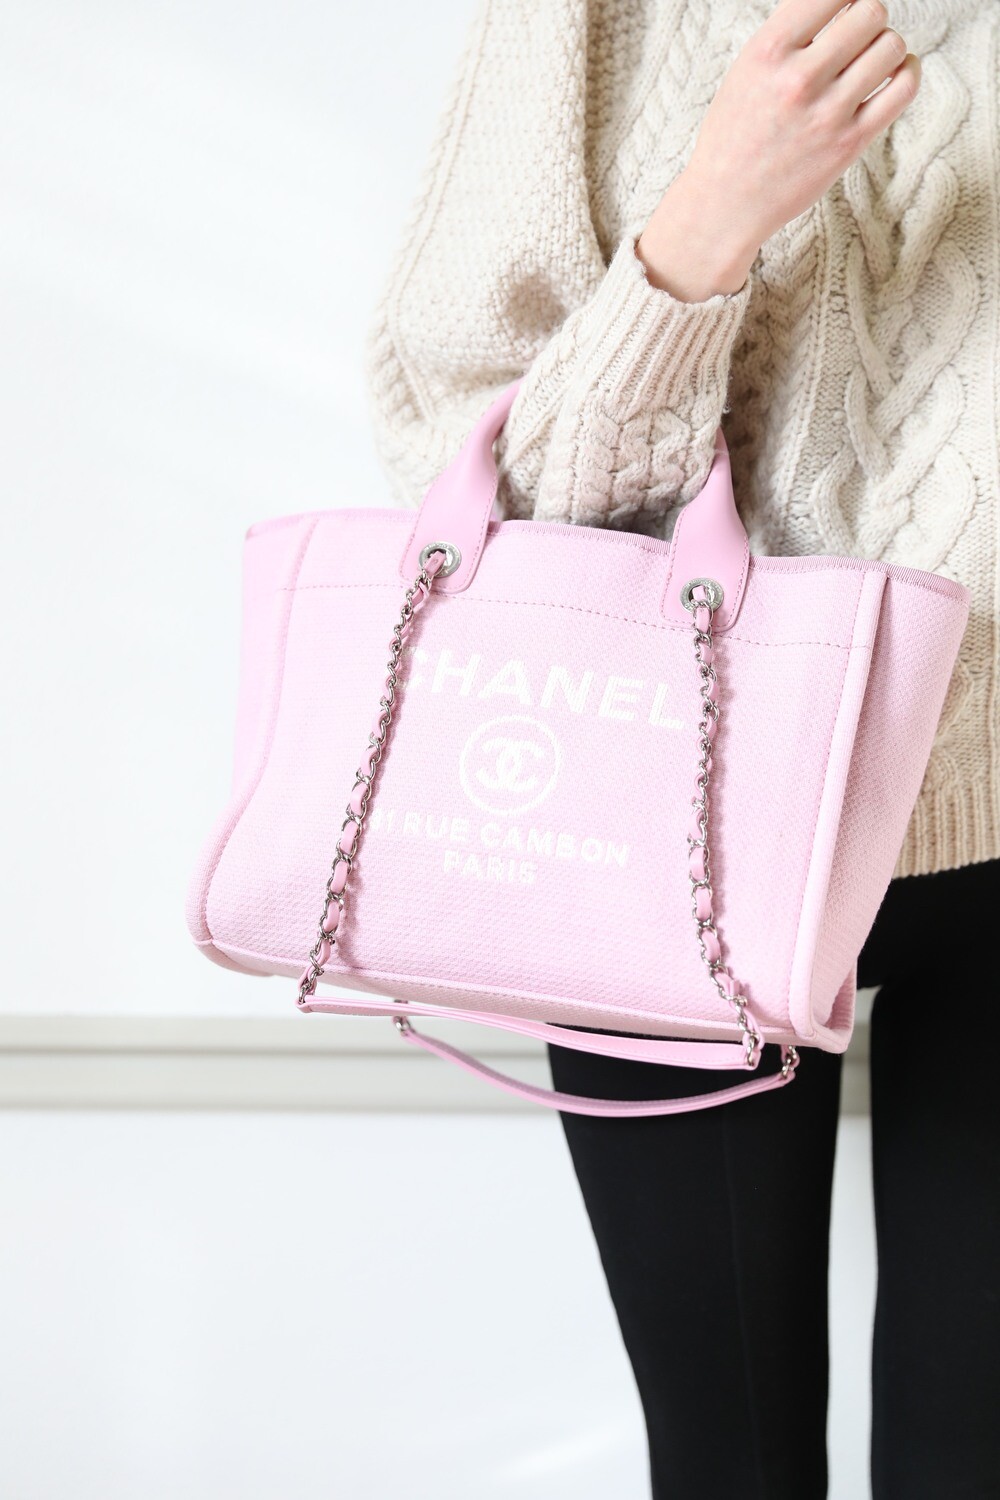 chanel pink cambon